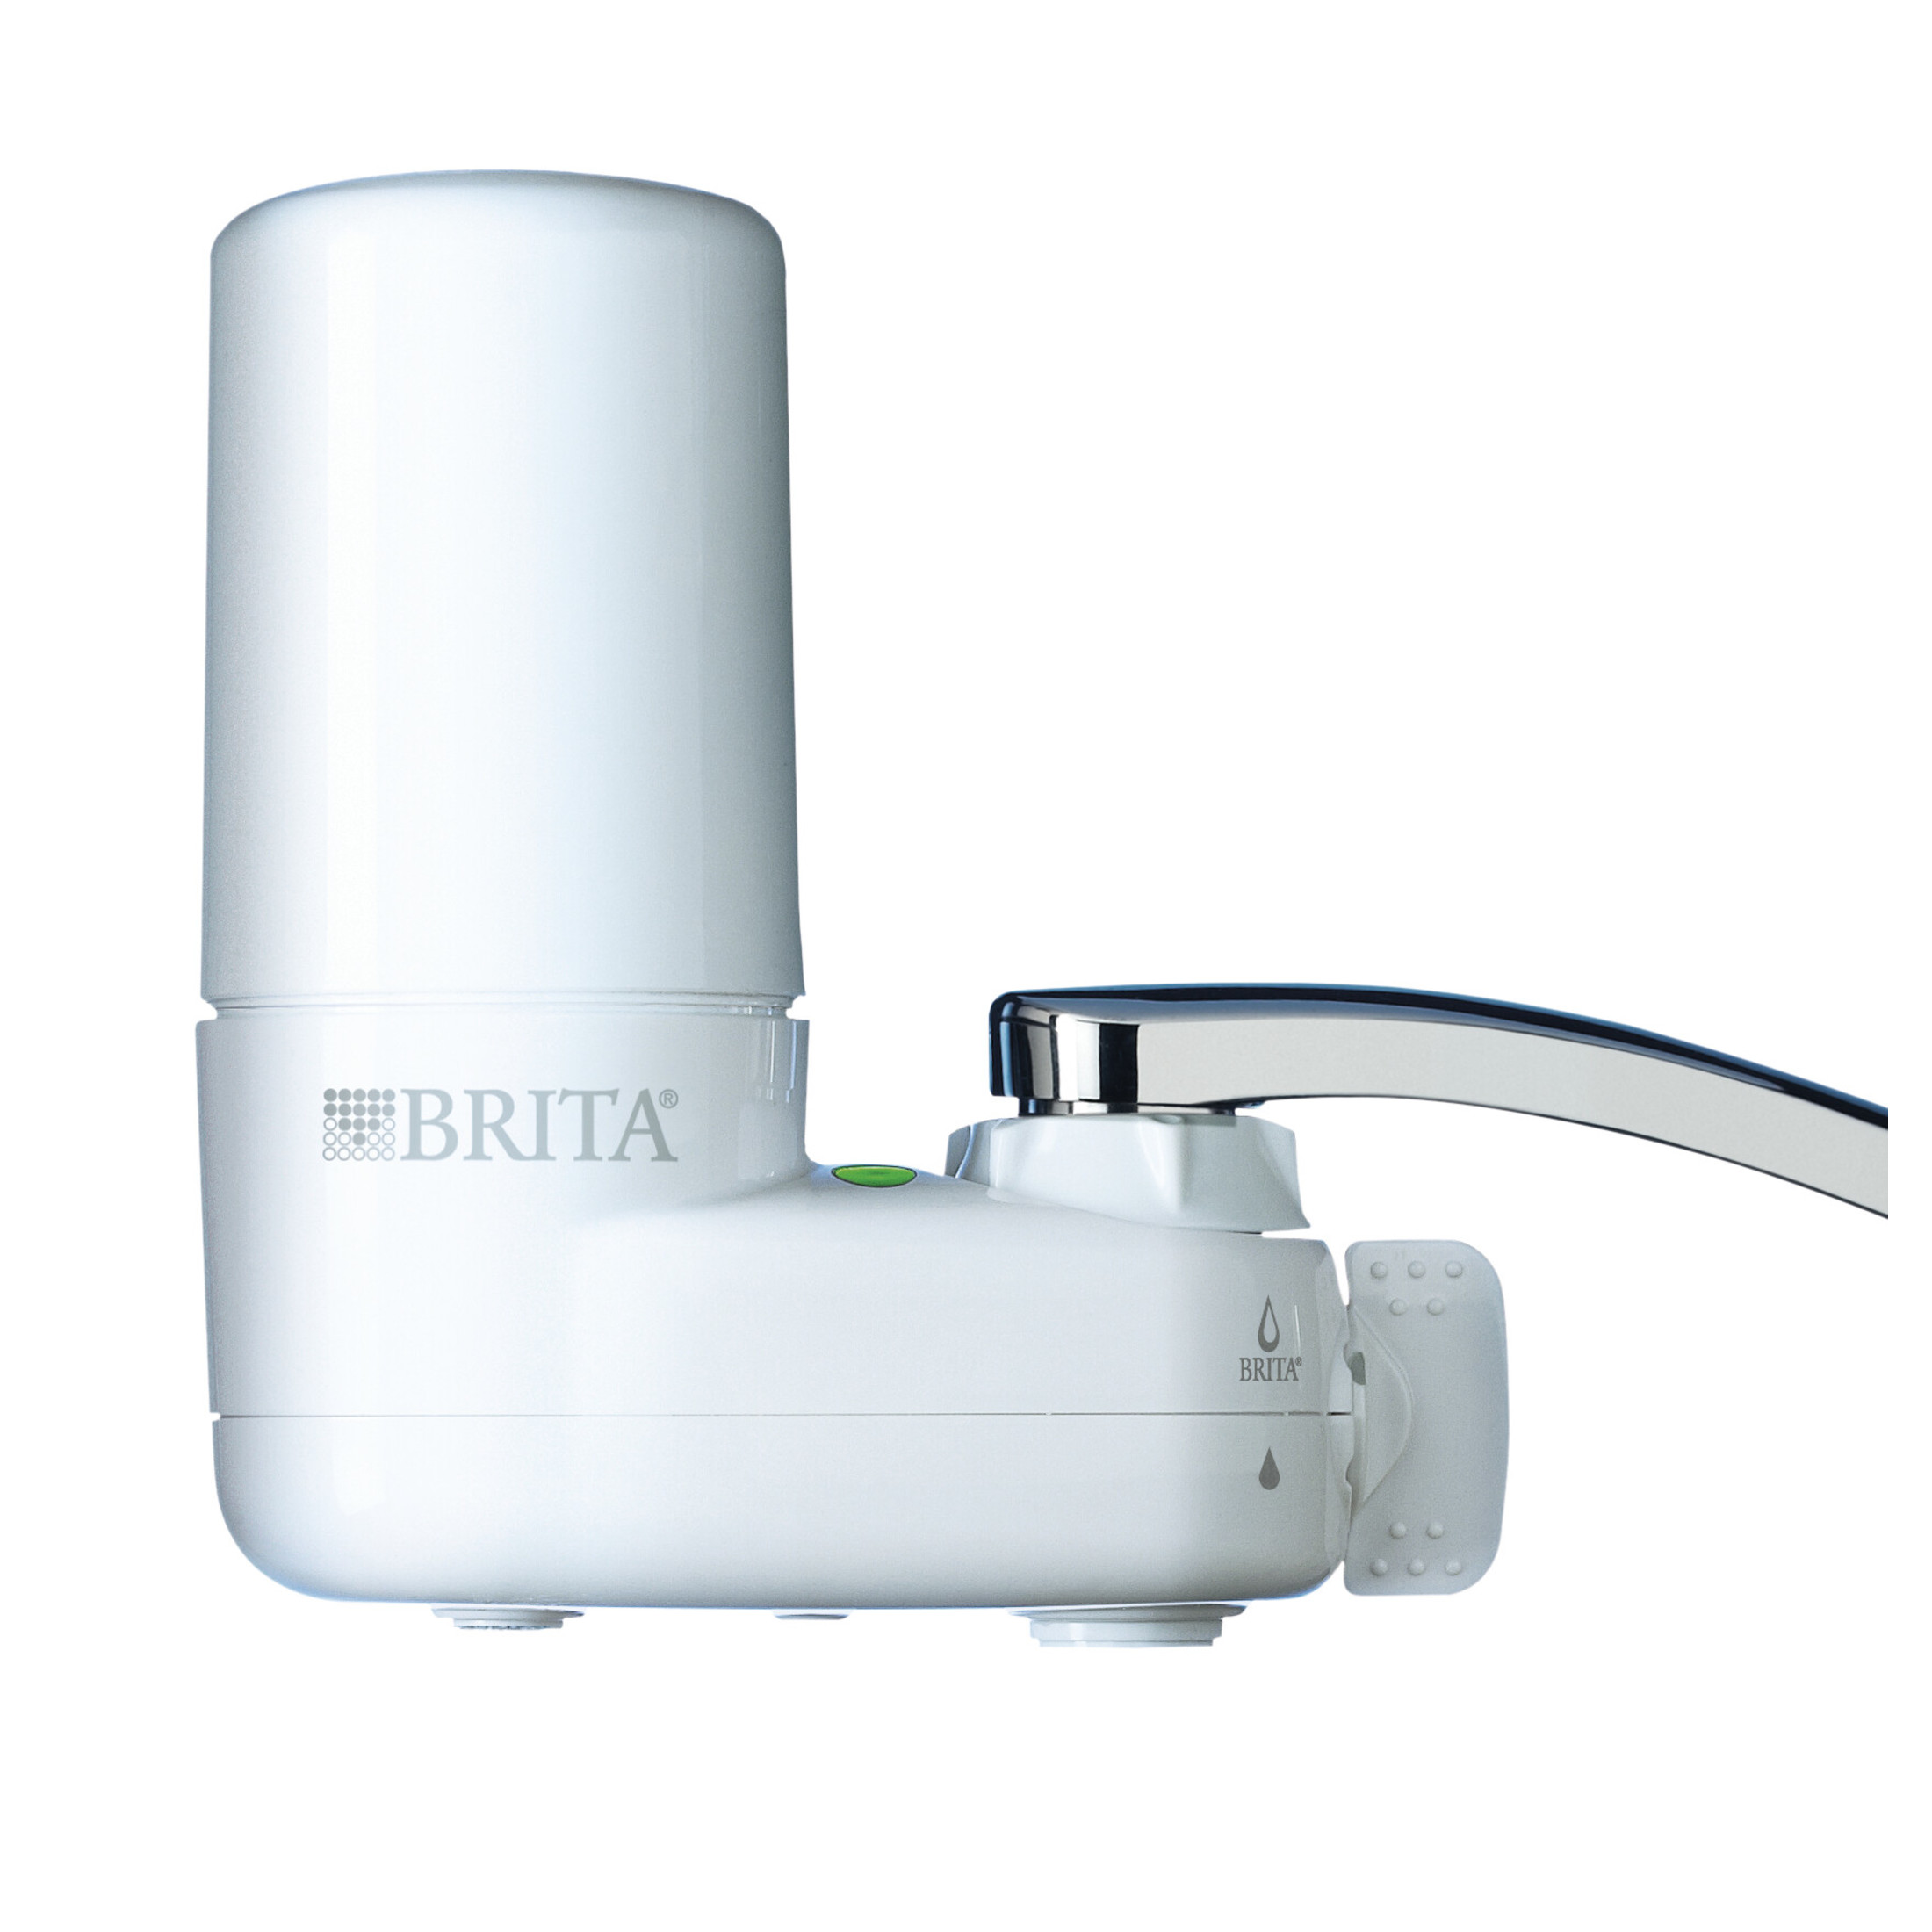 Brita Basic Faucet Mount System, Water Filter Reduces Lead and Chlorine, White - image 1 of 4